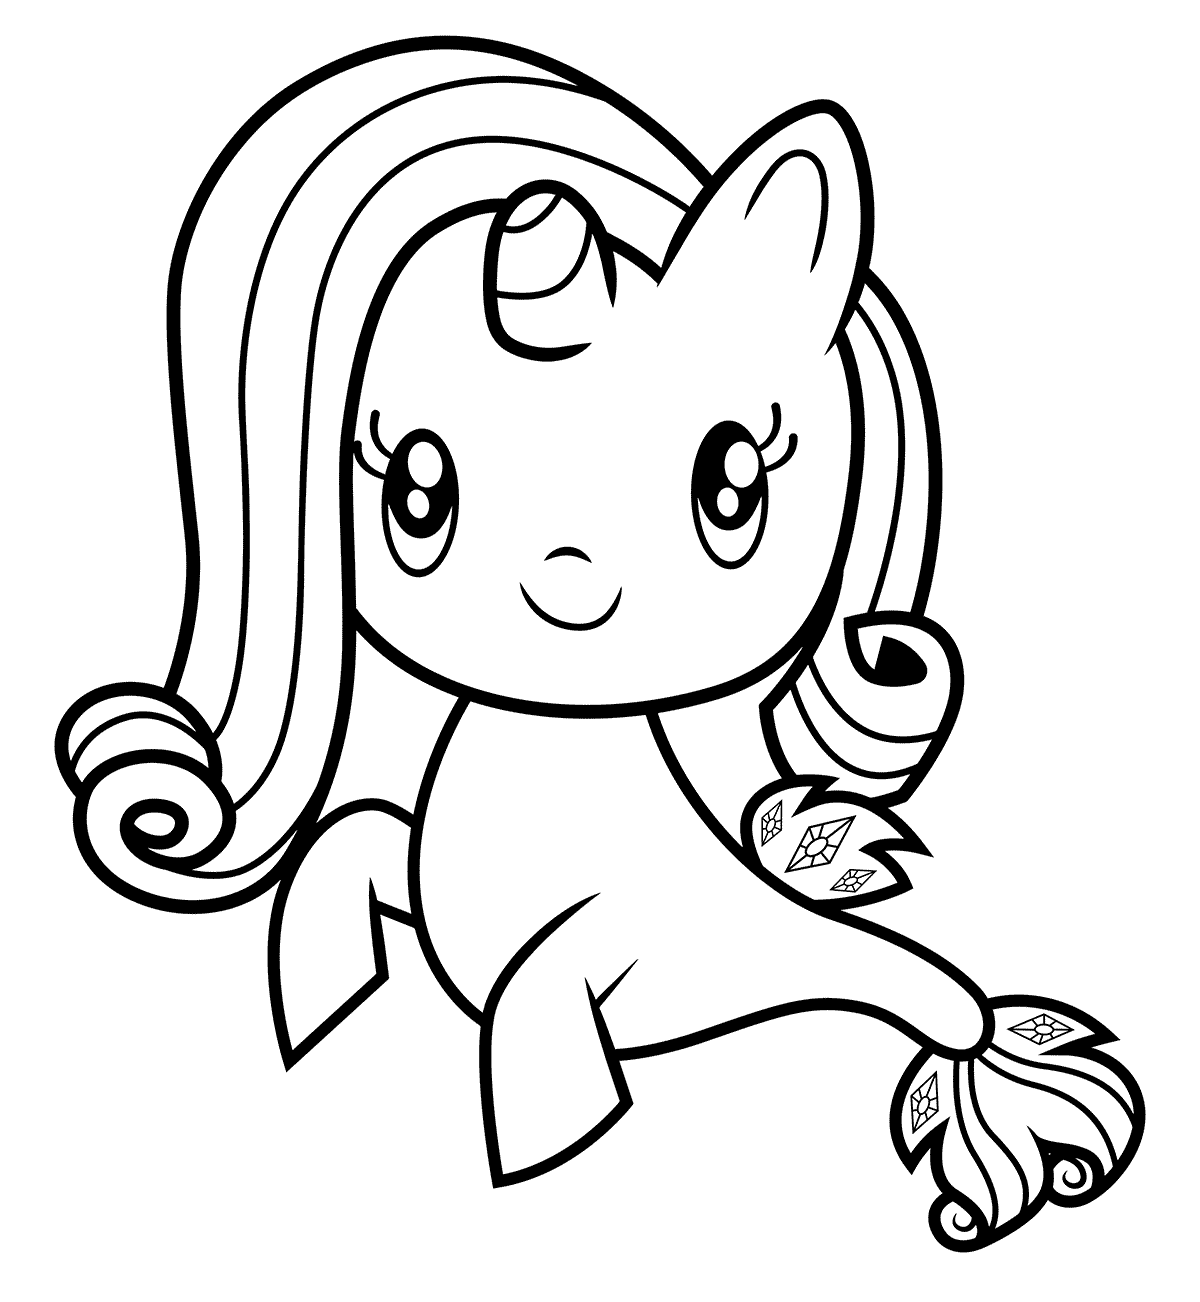 Rarity coloring pages